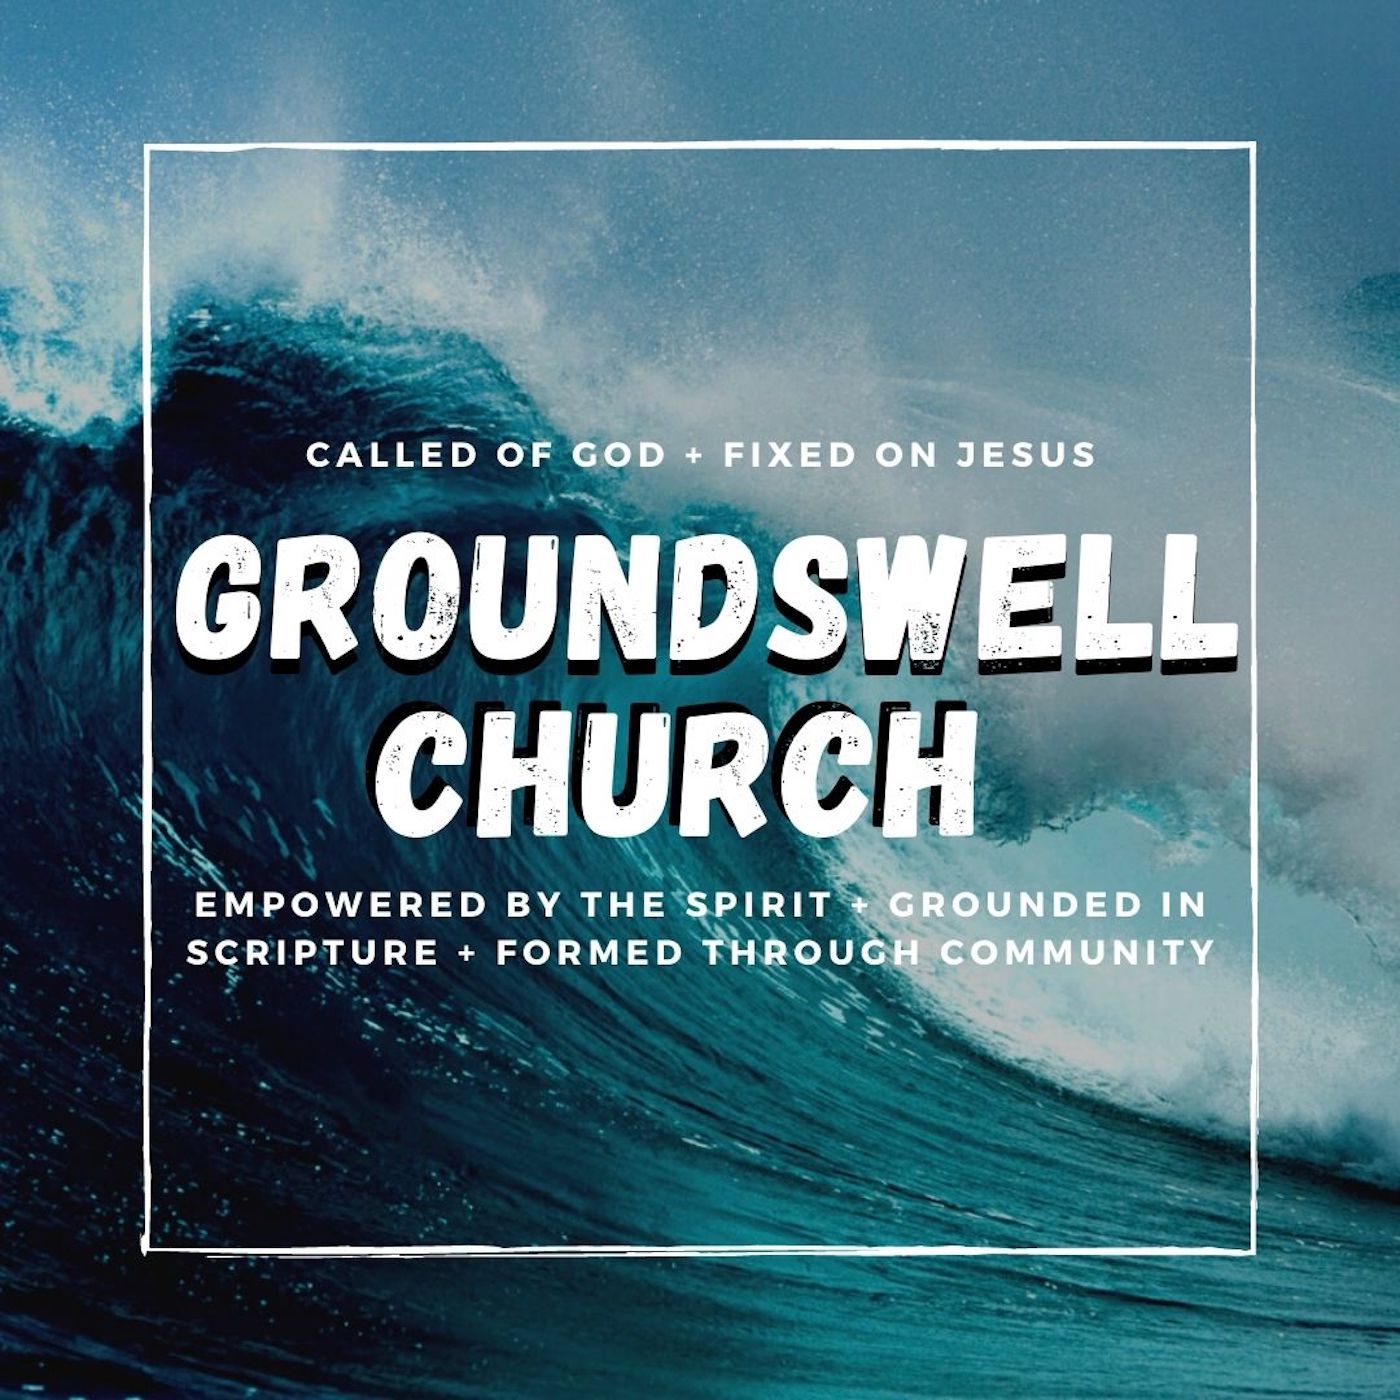 The Groundswell Church